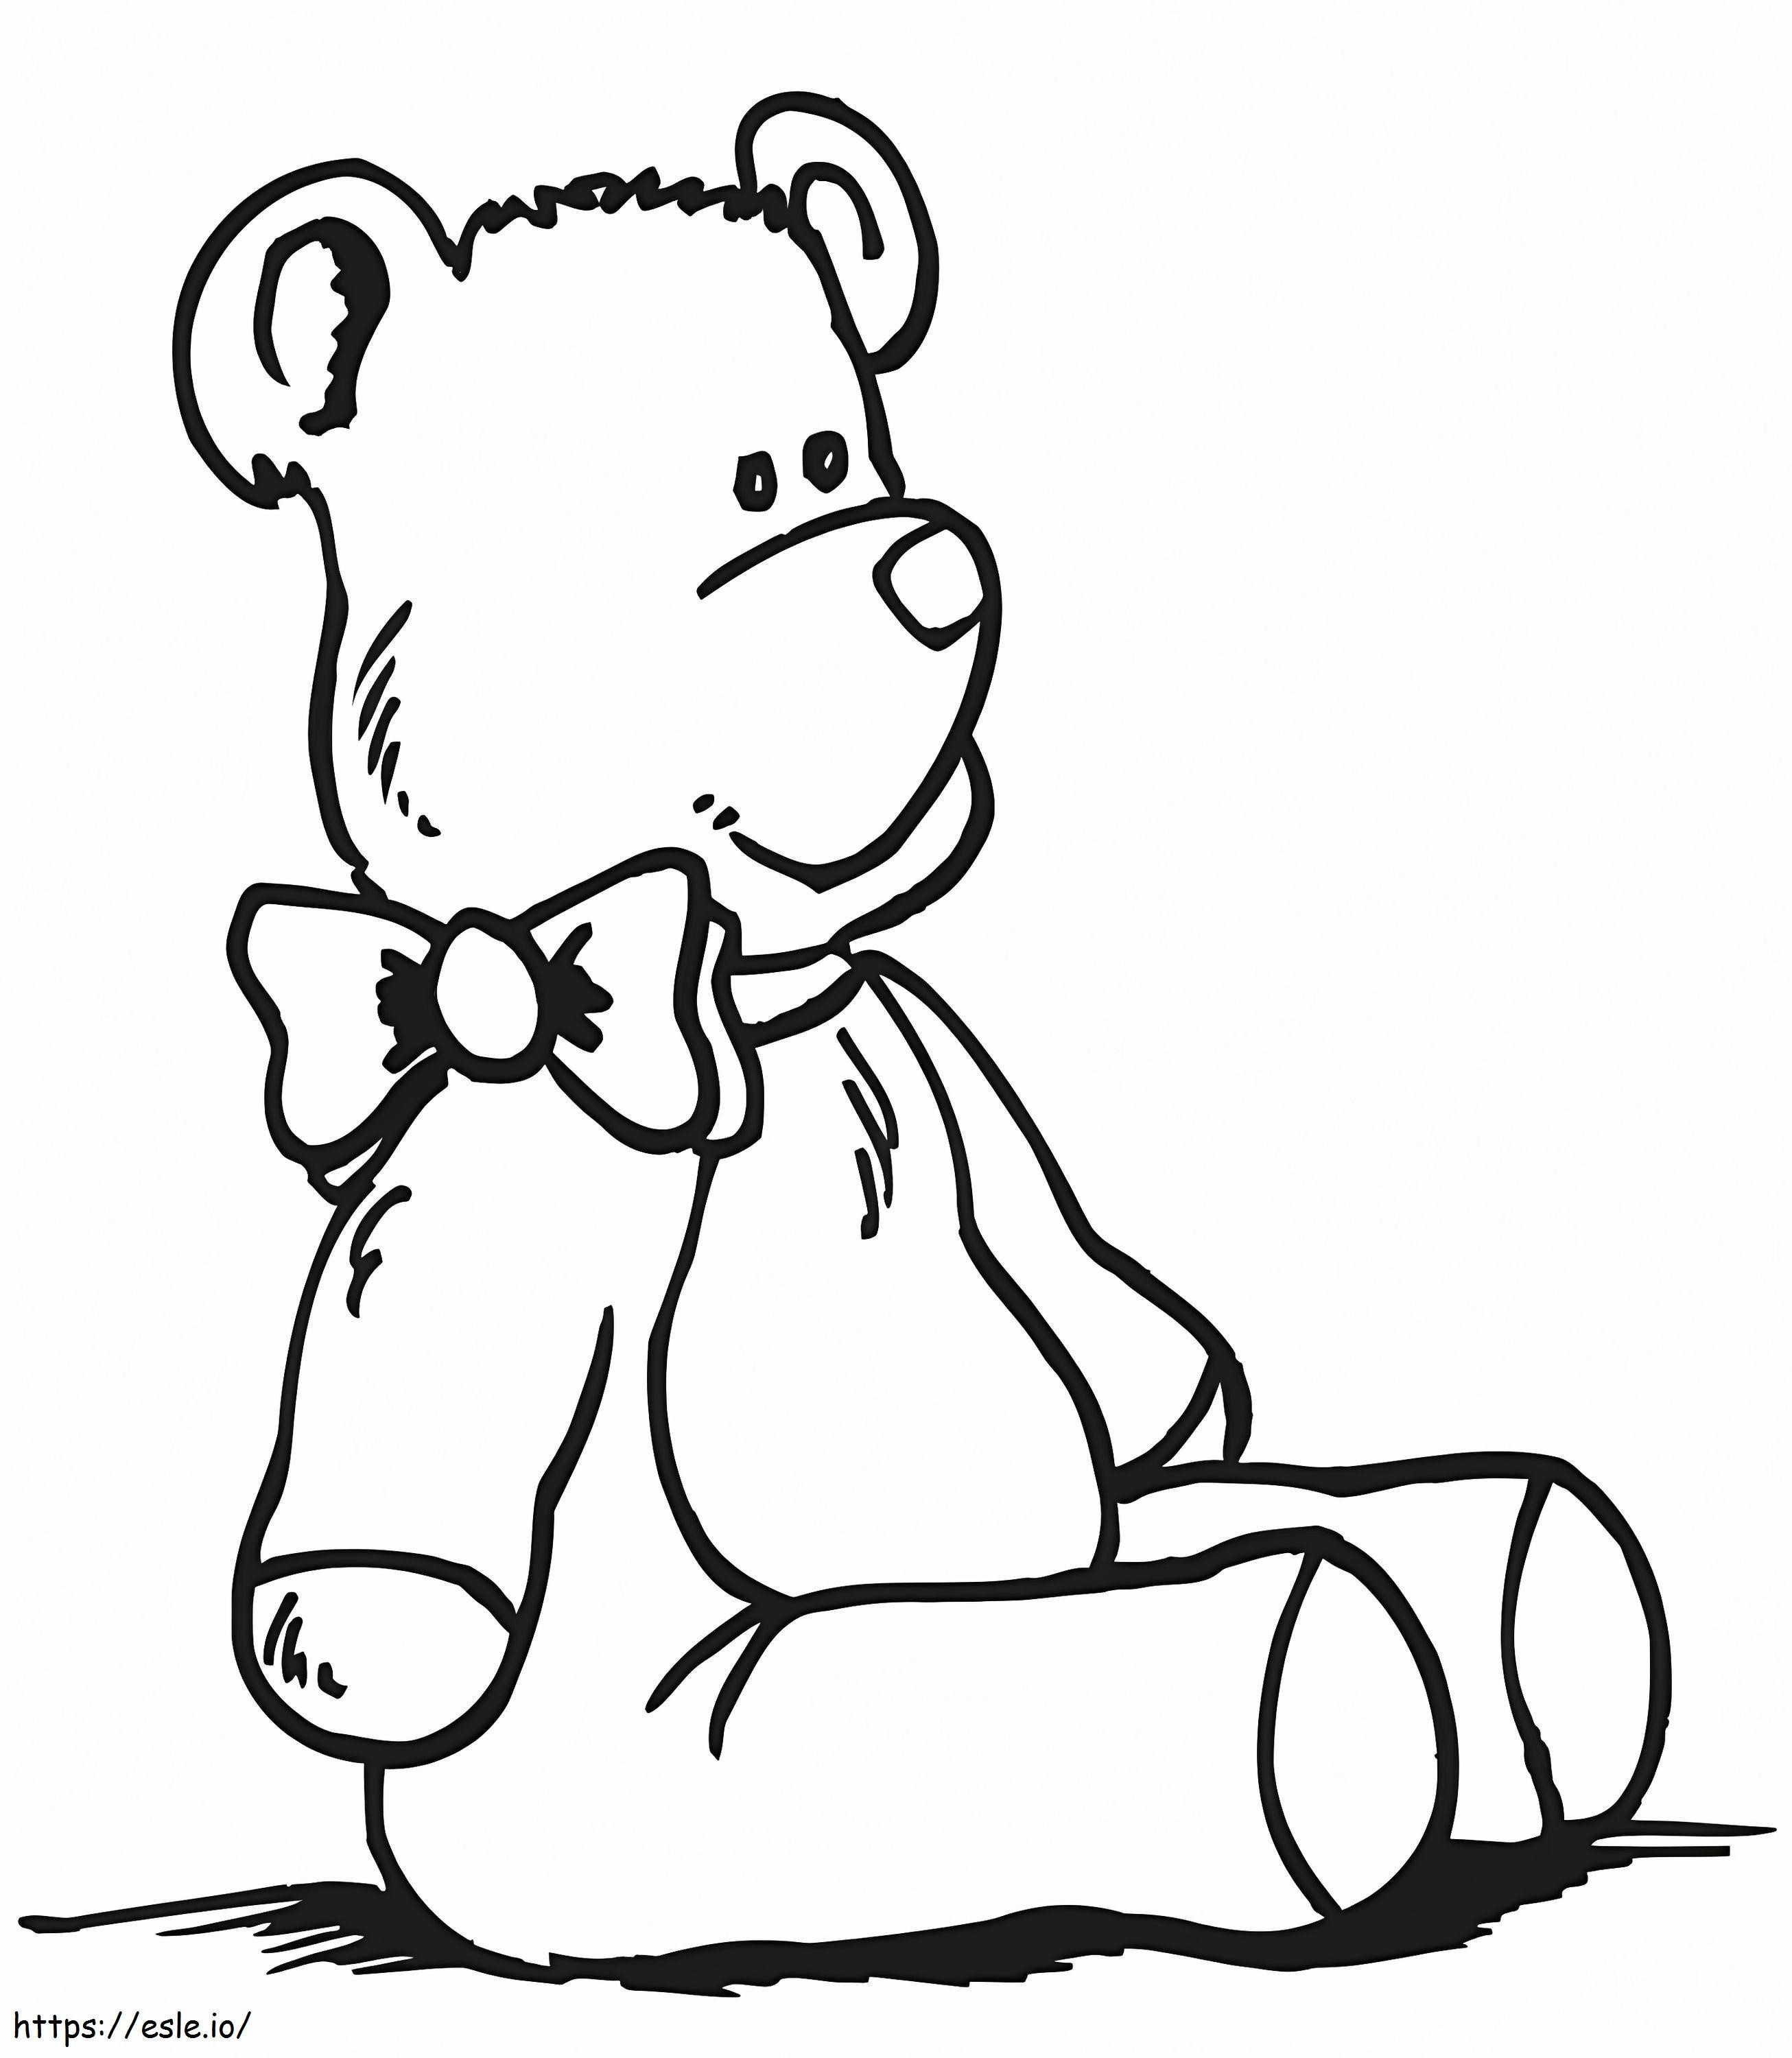 Teddy Bear Sitting coloring page